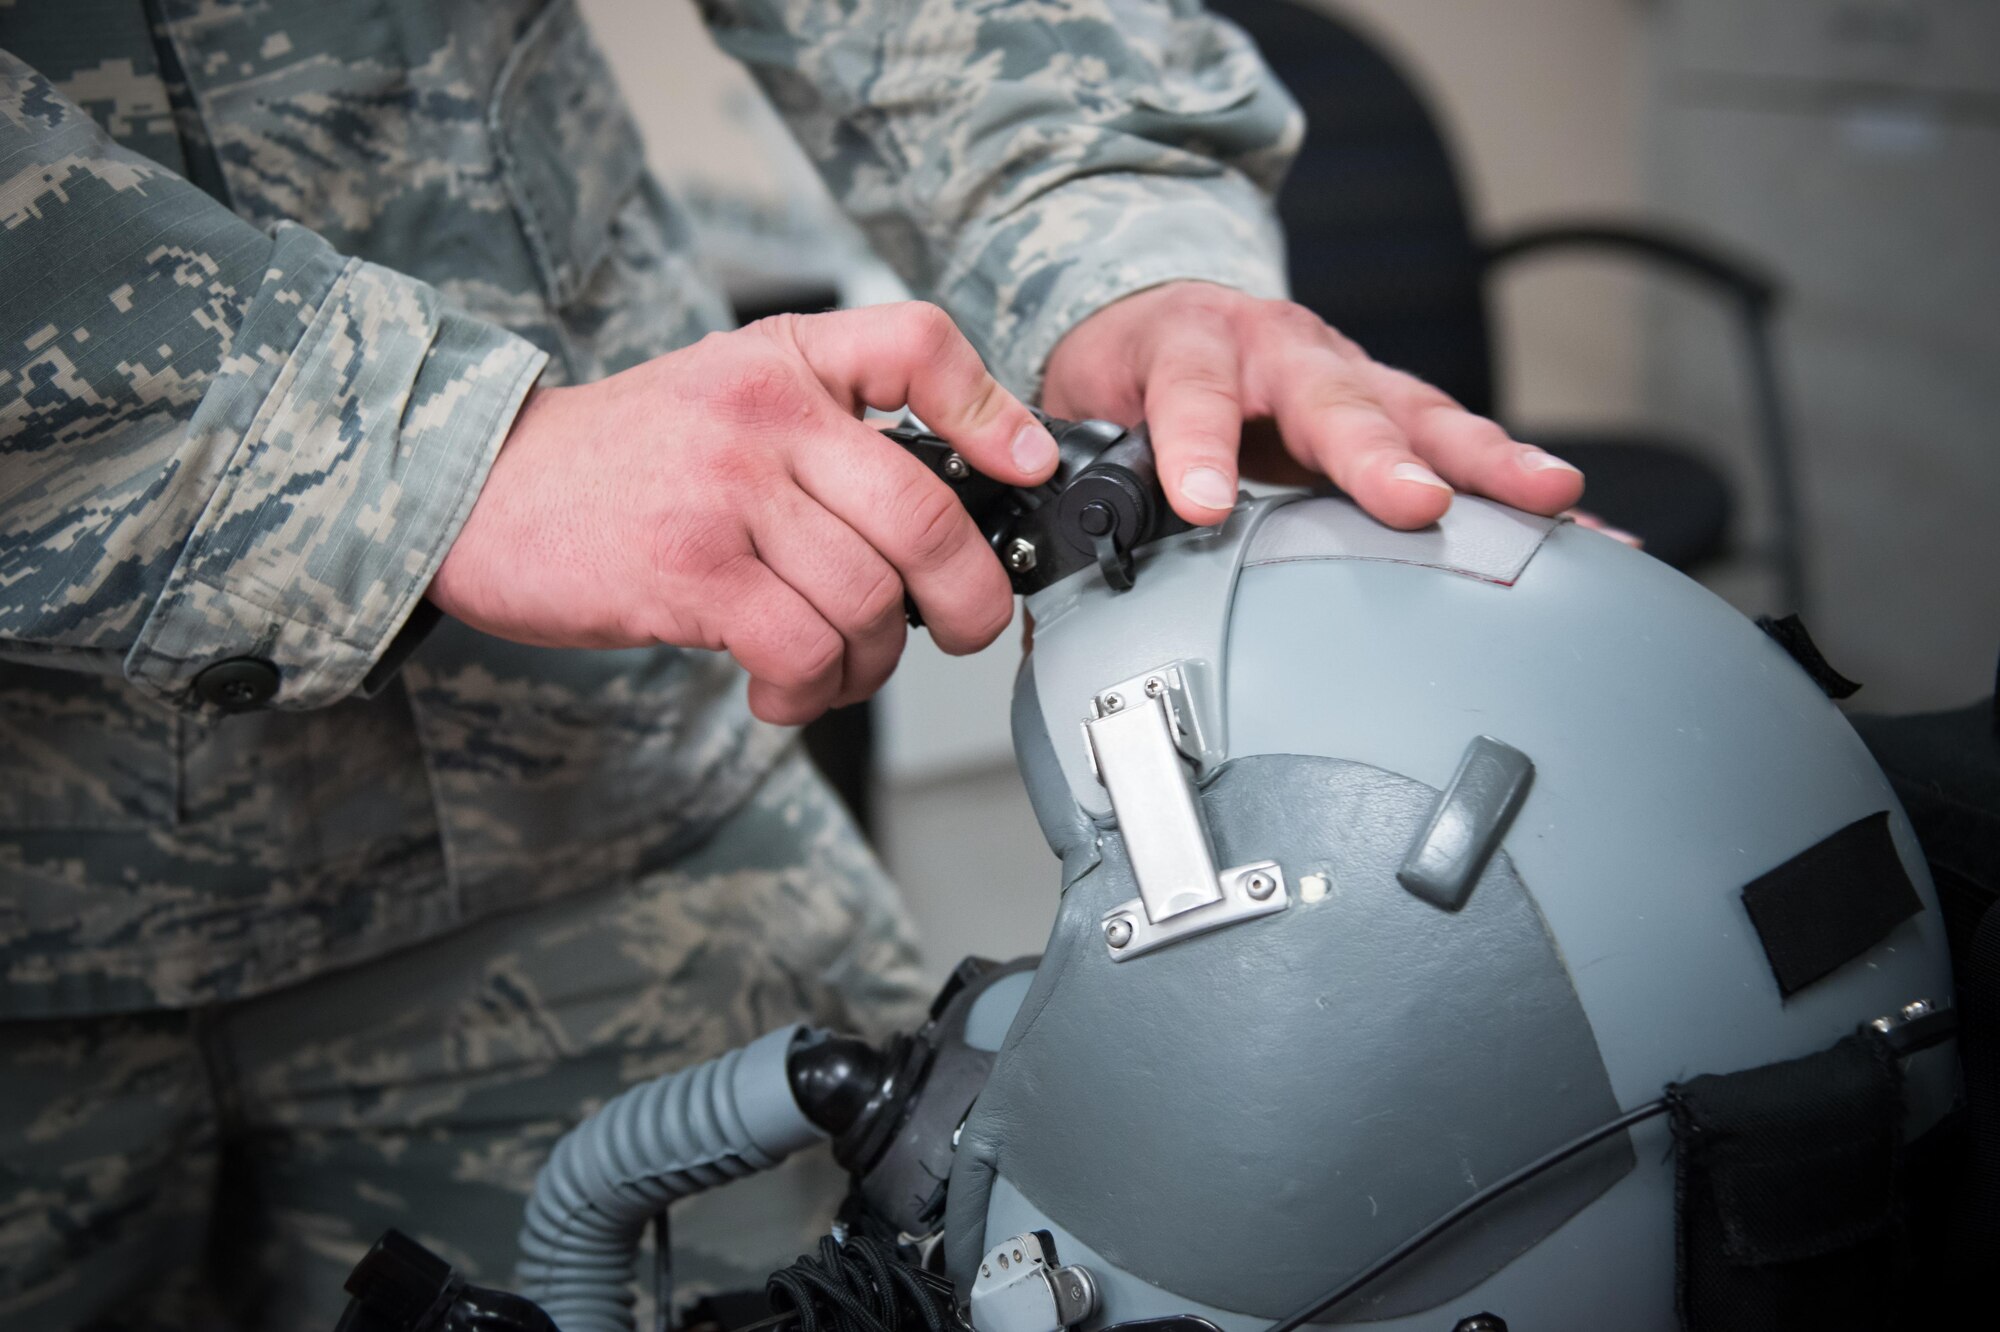 Staff Sgt. Justin Necaise, 403rd Operations Support Squadron survival technician attaches night vision goggles to a flight helmet Feb. 22 at Keesler Air Force Base, Mississippi. (U.S. Air Force photo/Staff Sgt. Heather Heiney)